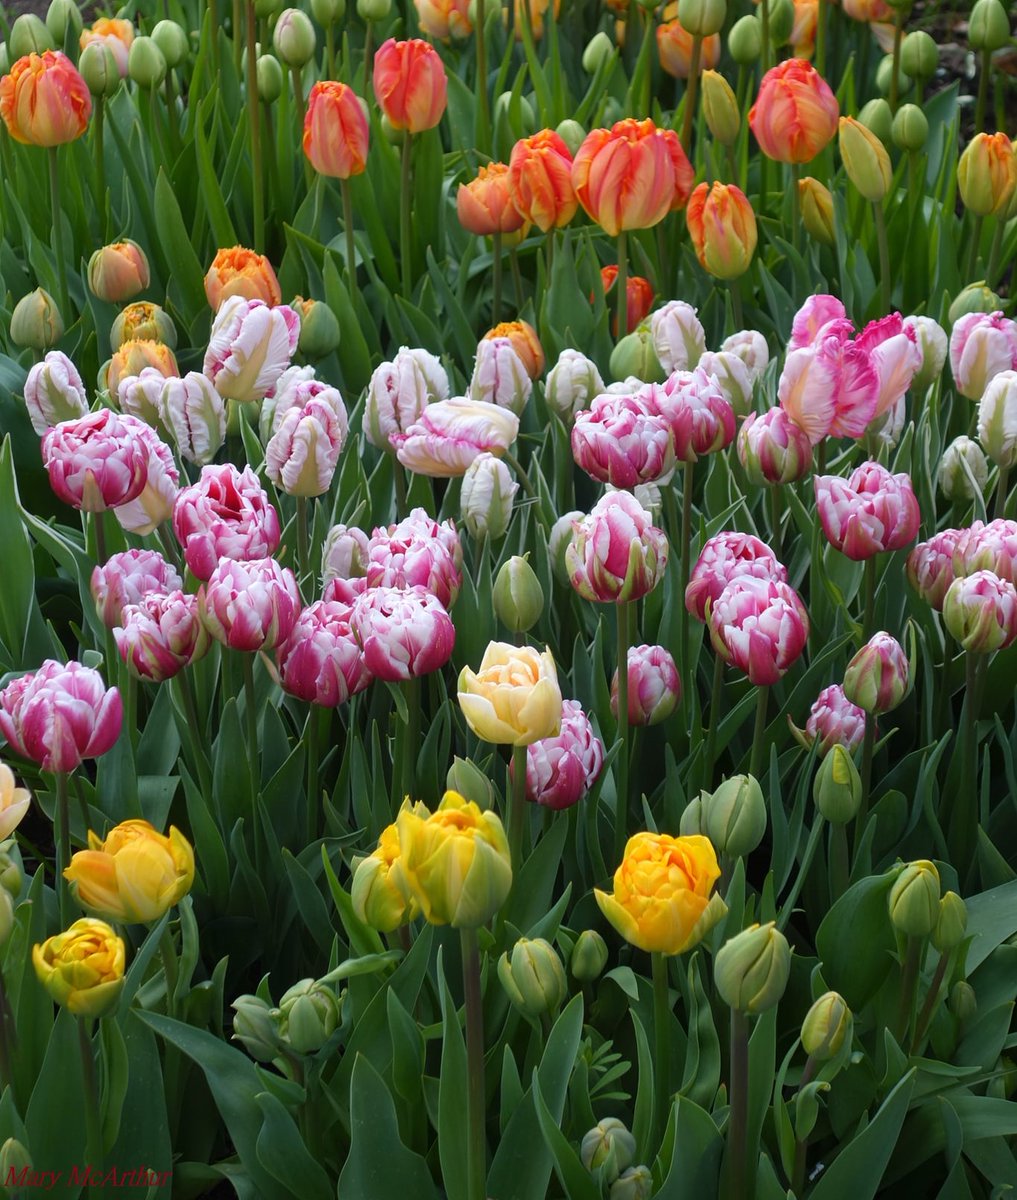 @SiKImagery #FridayFreeForAll -   Tulip time in Oak Bay, BC ~ 💗🌷